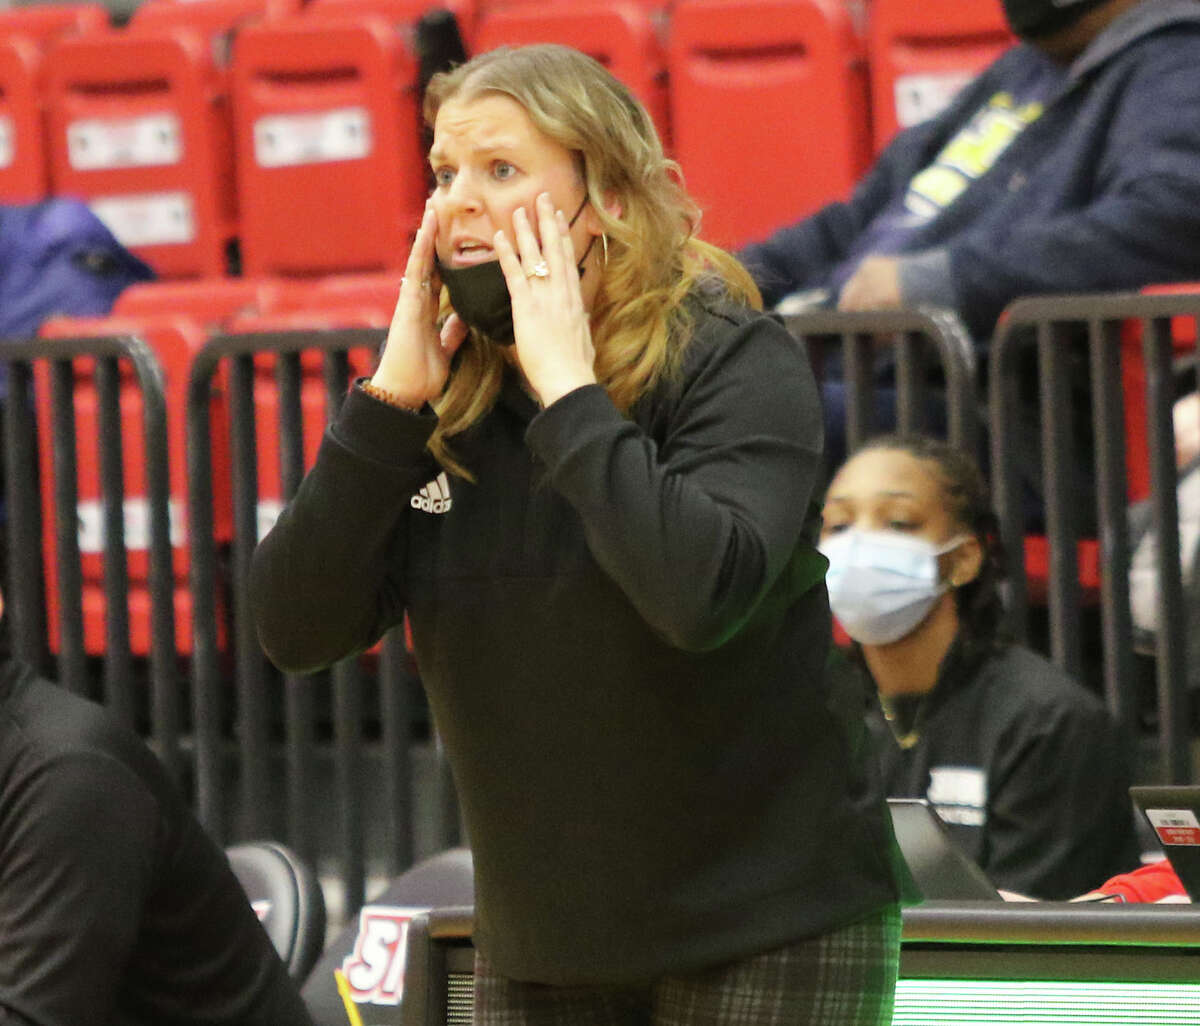 SIUE coach Samantha Quigley Smith tries to make sense of an official's call during a game against Arkansas State on Wednesday night at First Community Arena in Edwardsville.